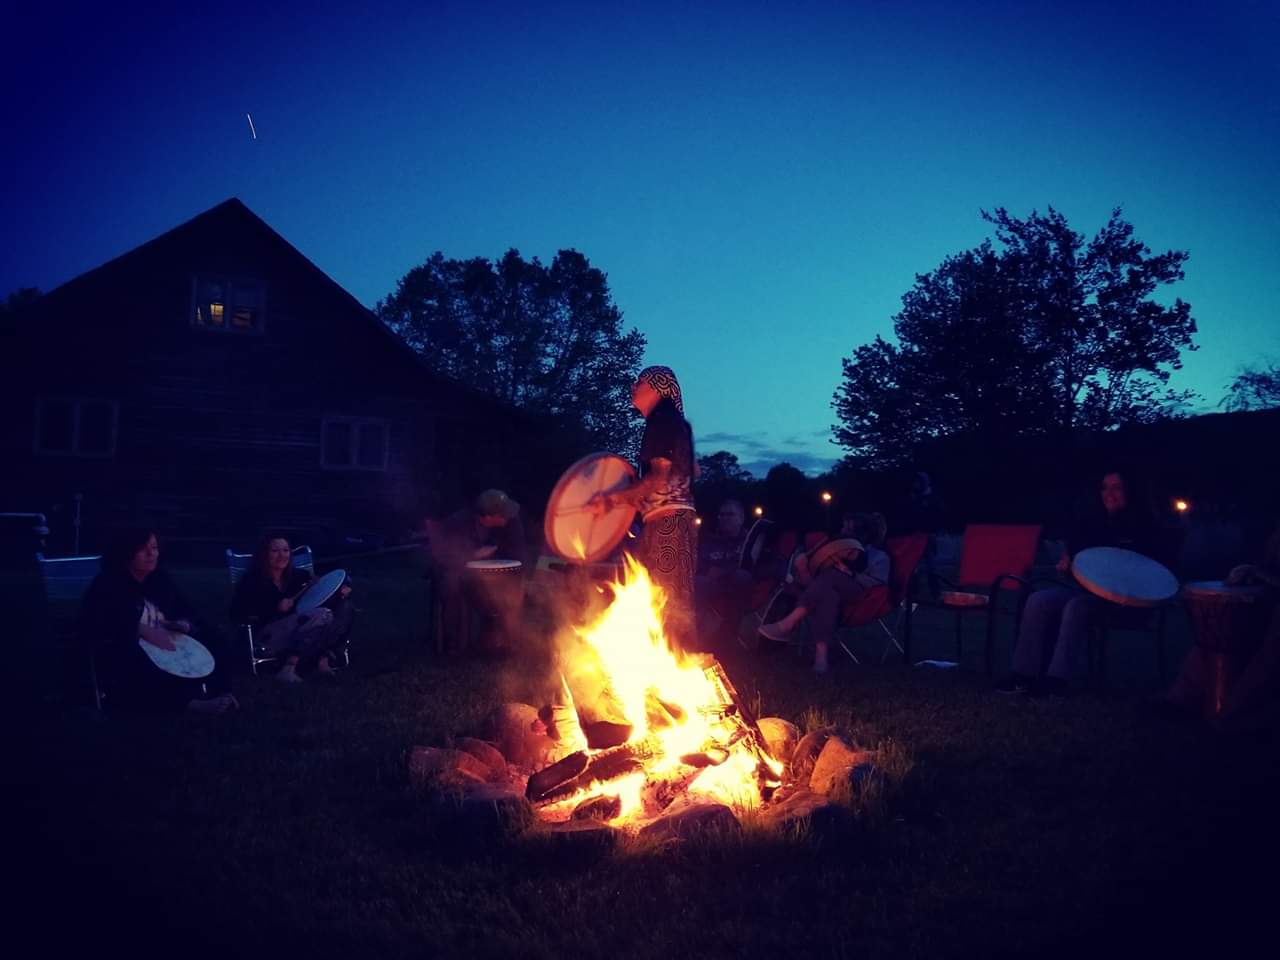 People drumming around a campfire